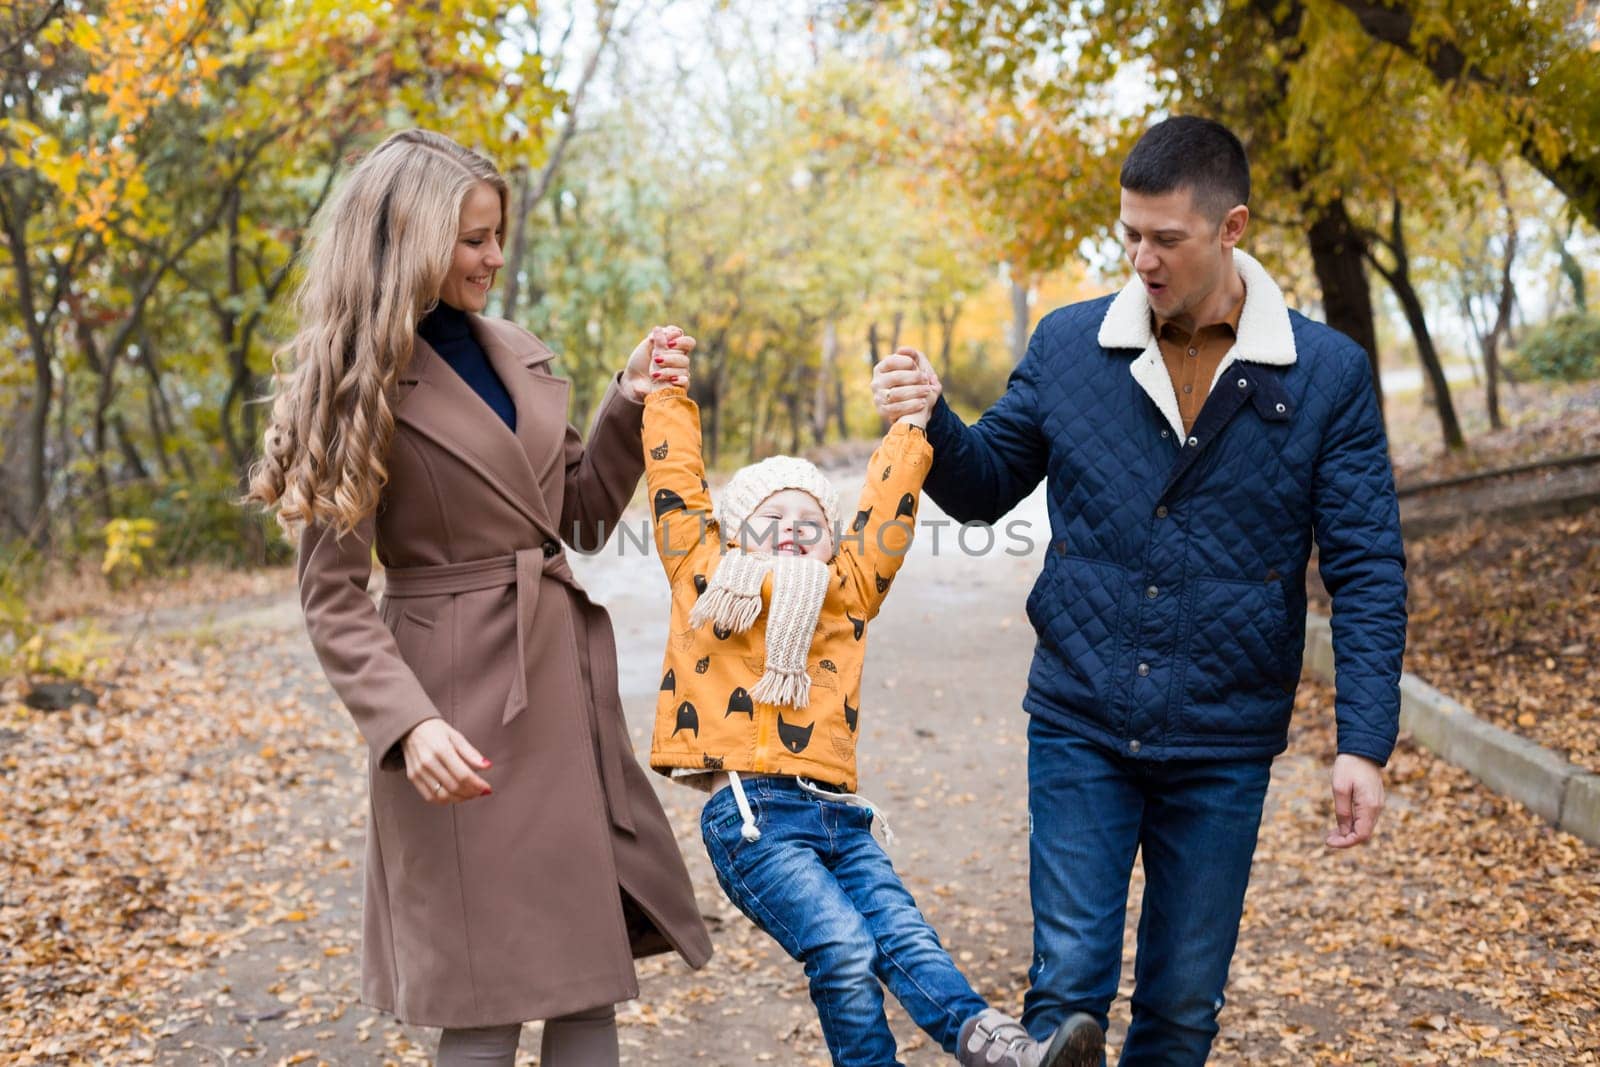 a family with a young son walk in the Park in autumn by Simakov